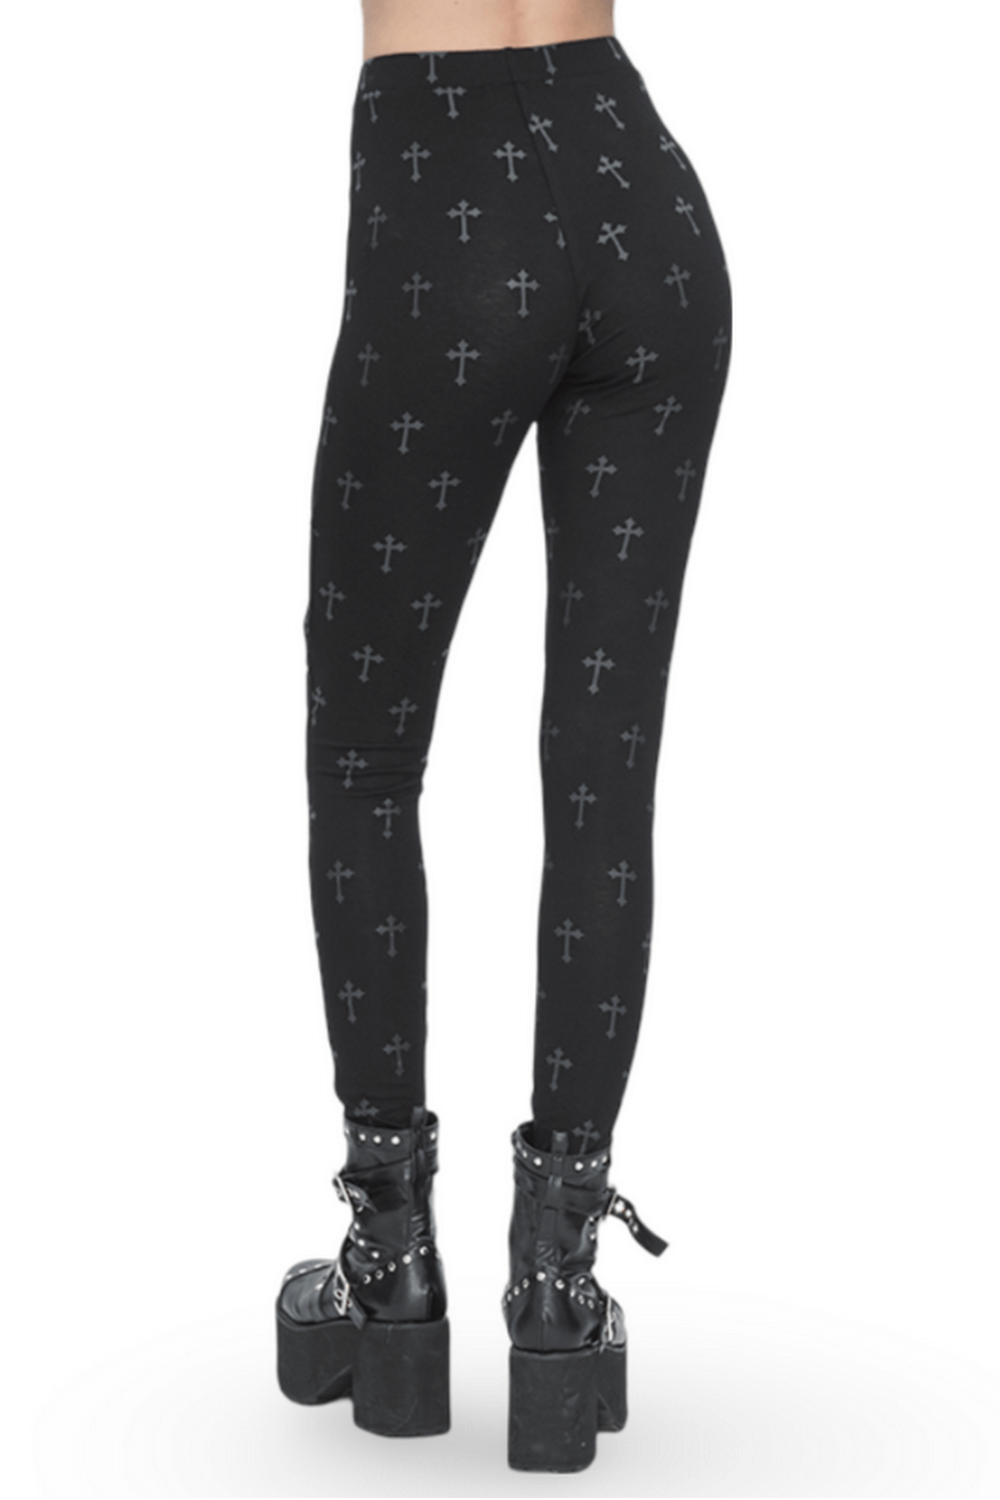 Gothic Style Cross Lace-up Leggings for Women